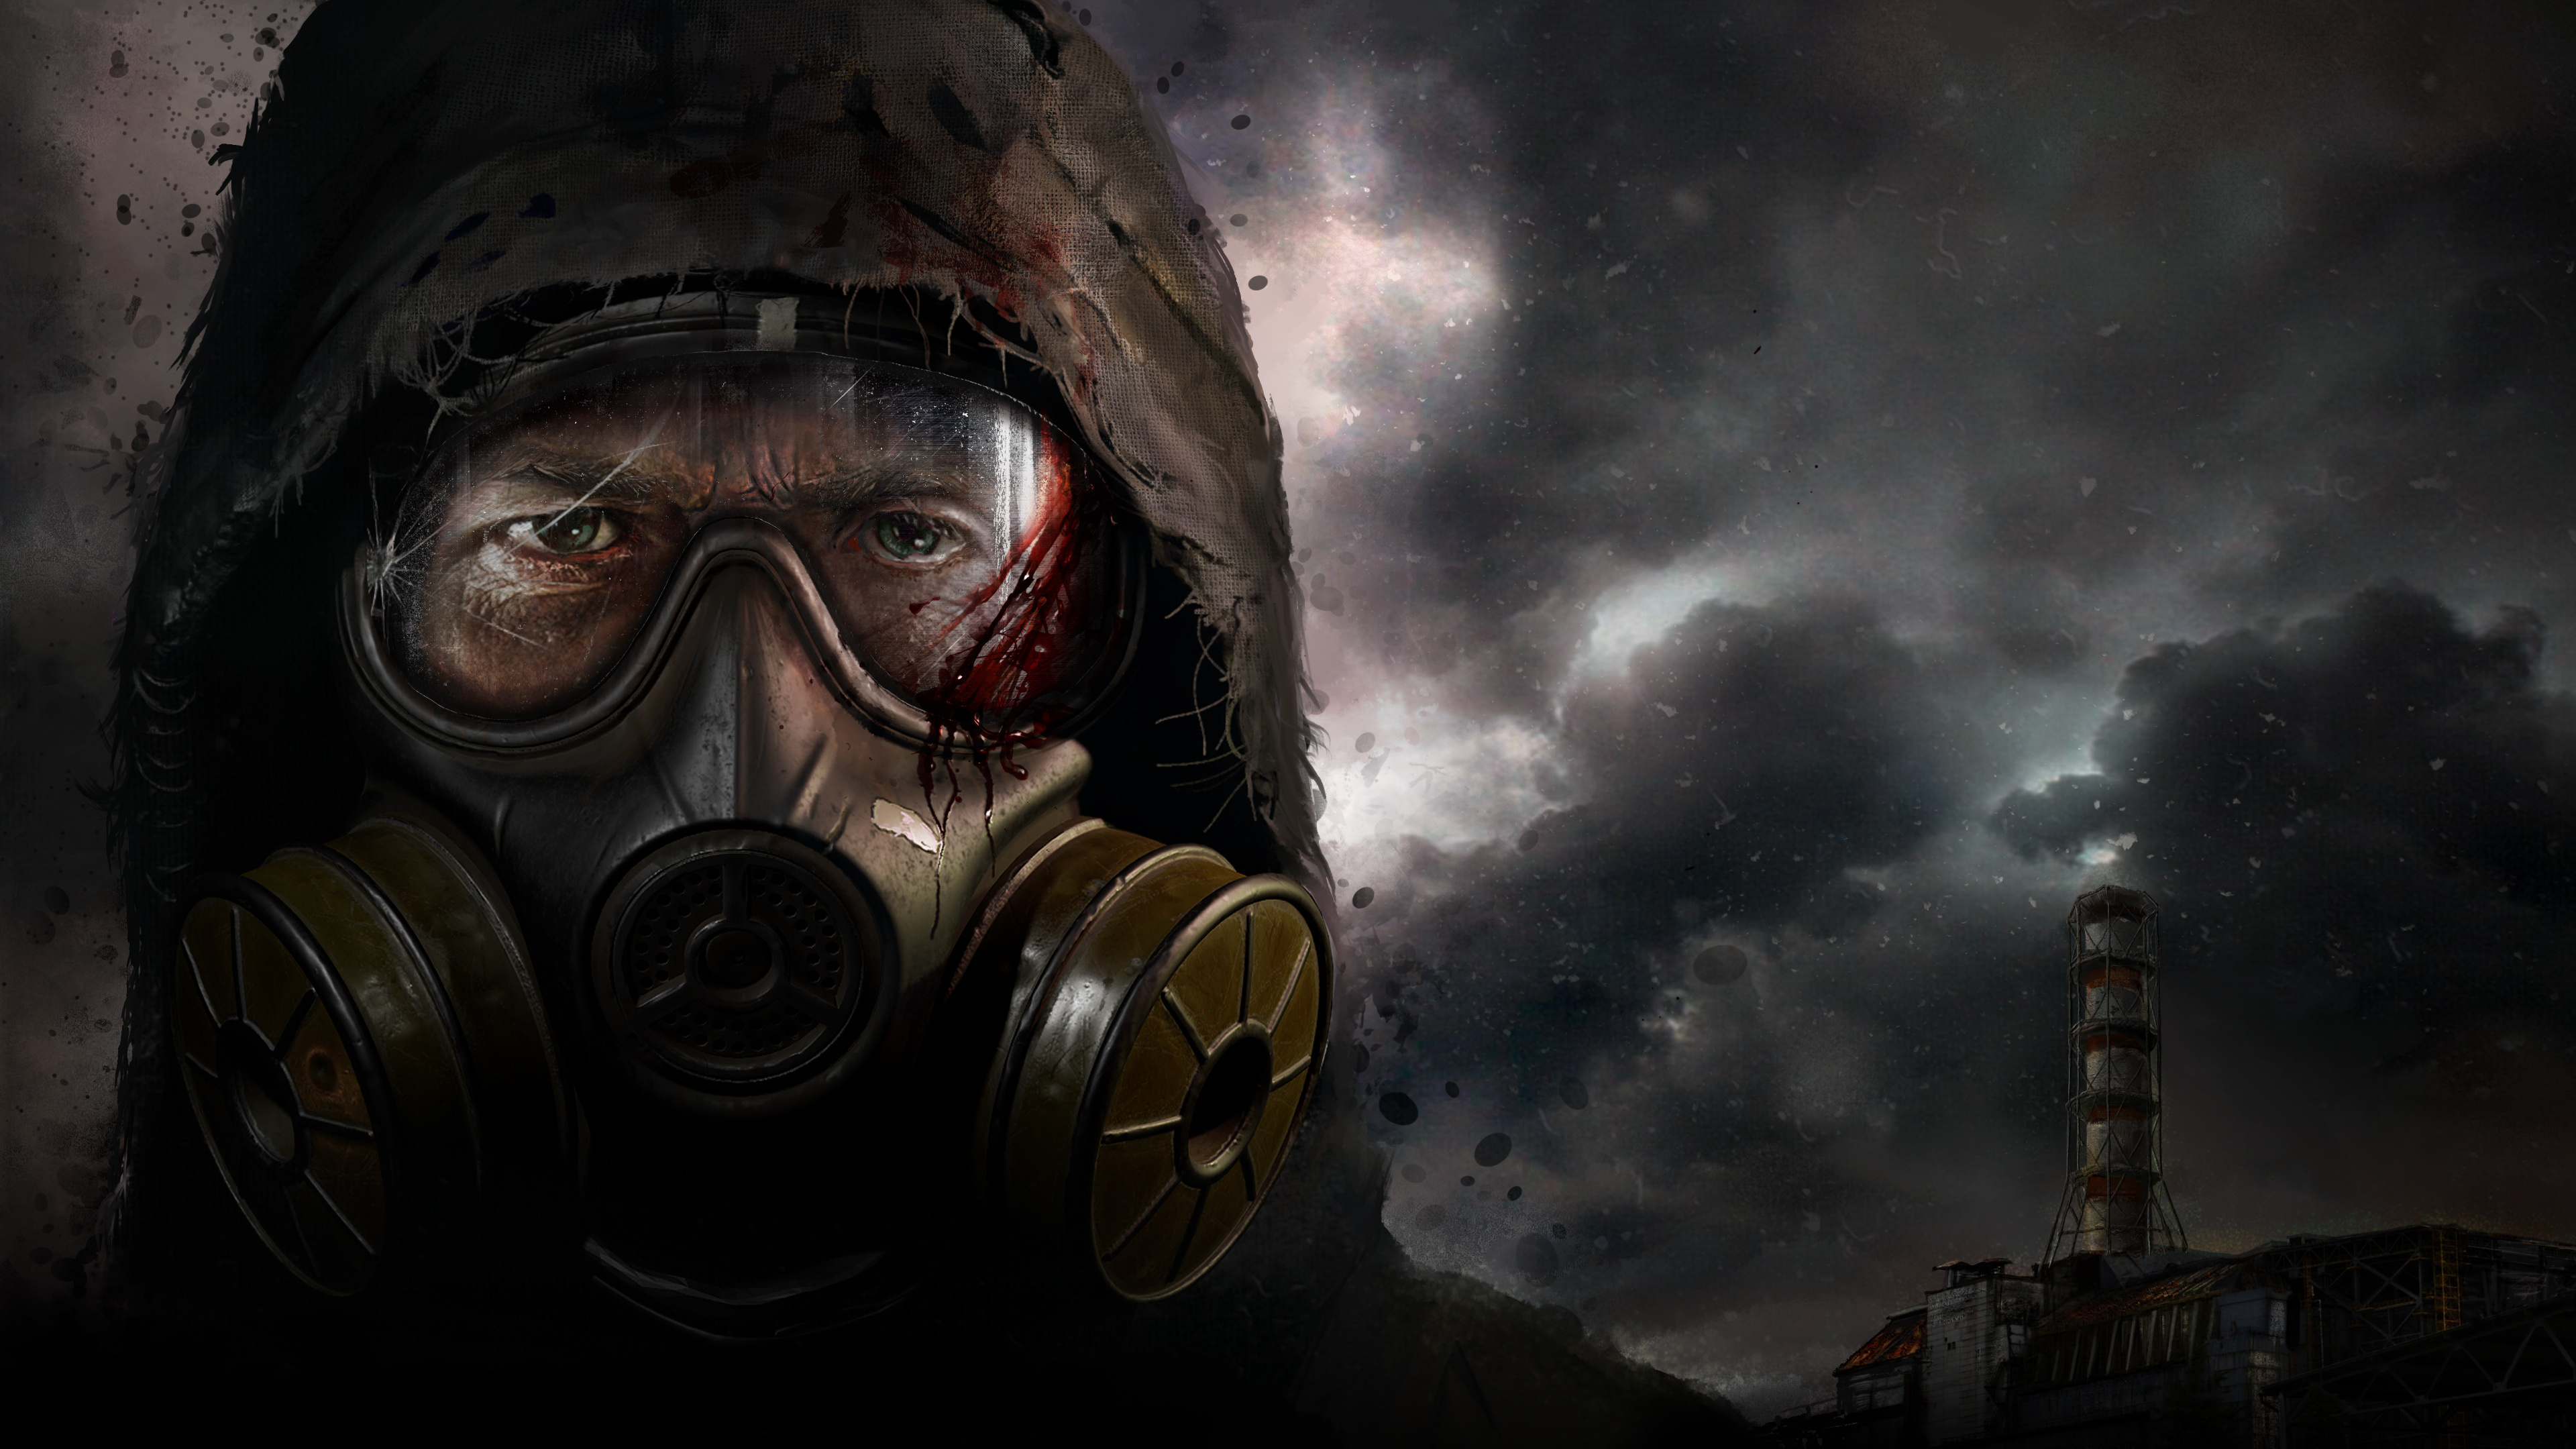 S.T.A.L.K.E.R. 2: Heart of Chornobyl, An upcoming first-person shooter survival horror video game. 3840x2160 4K Wallpaper.